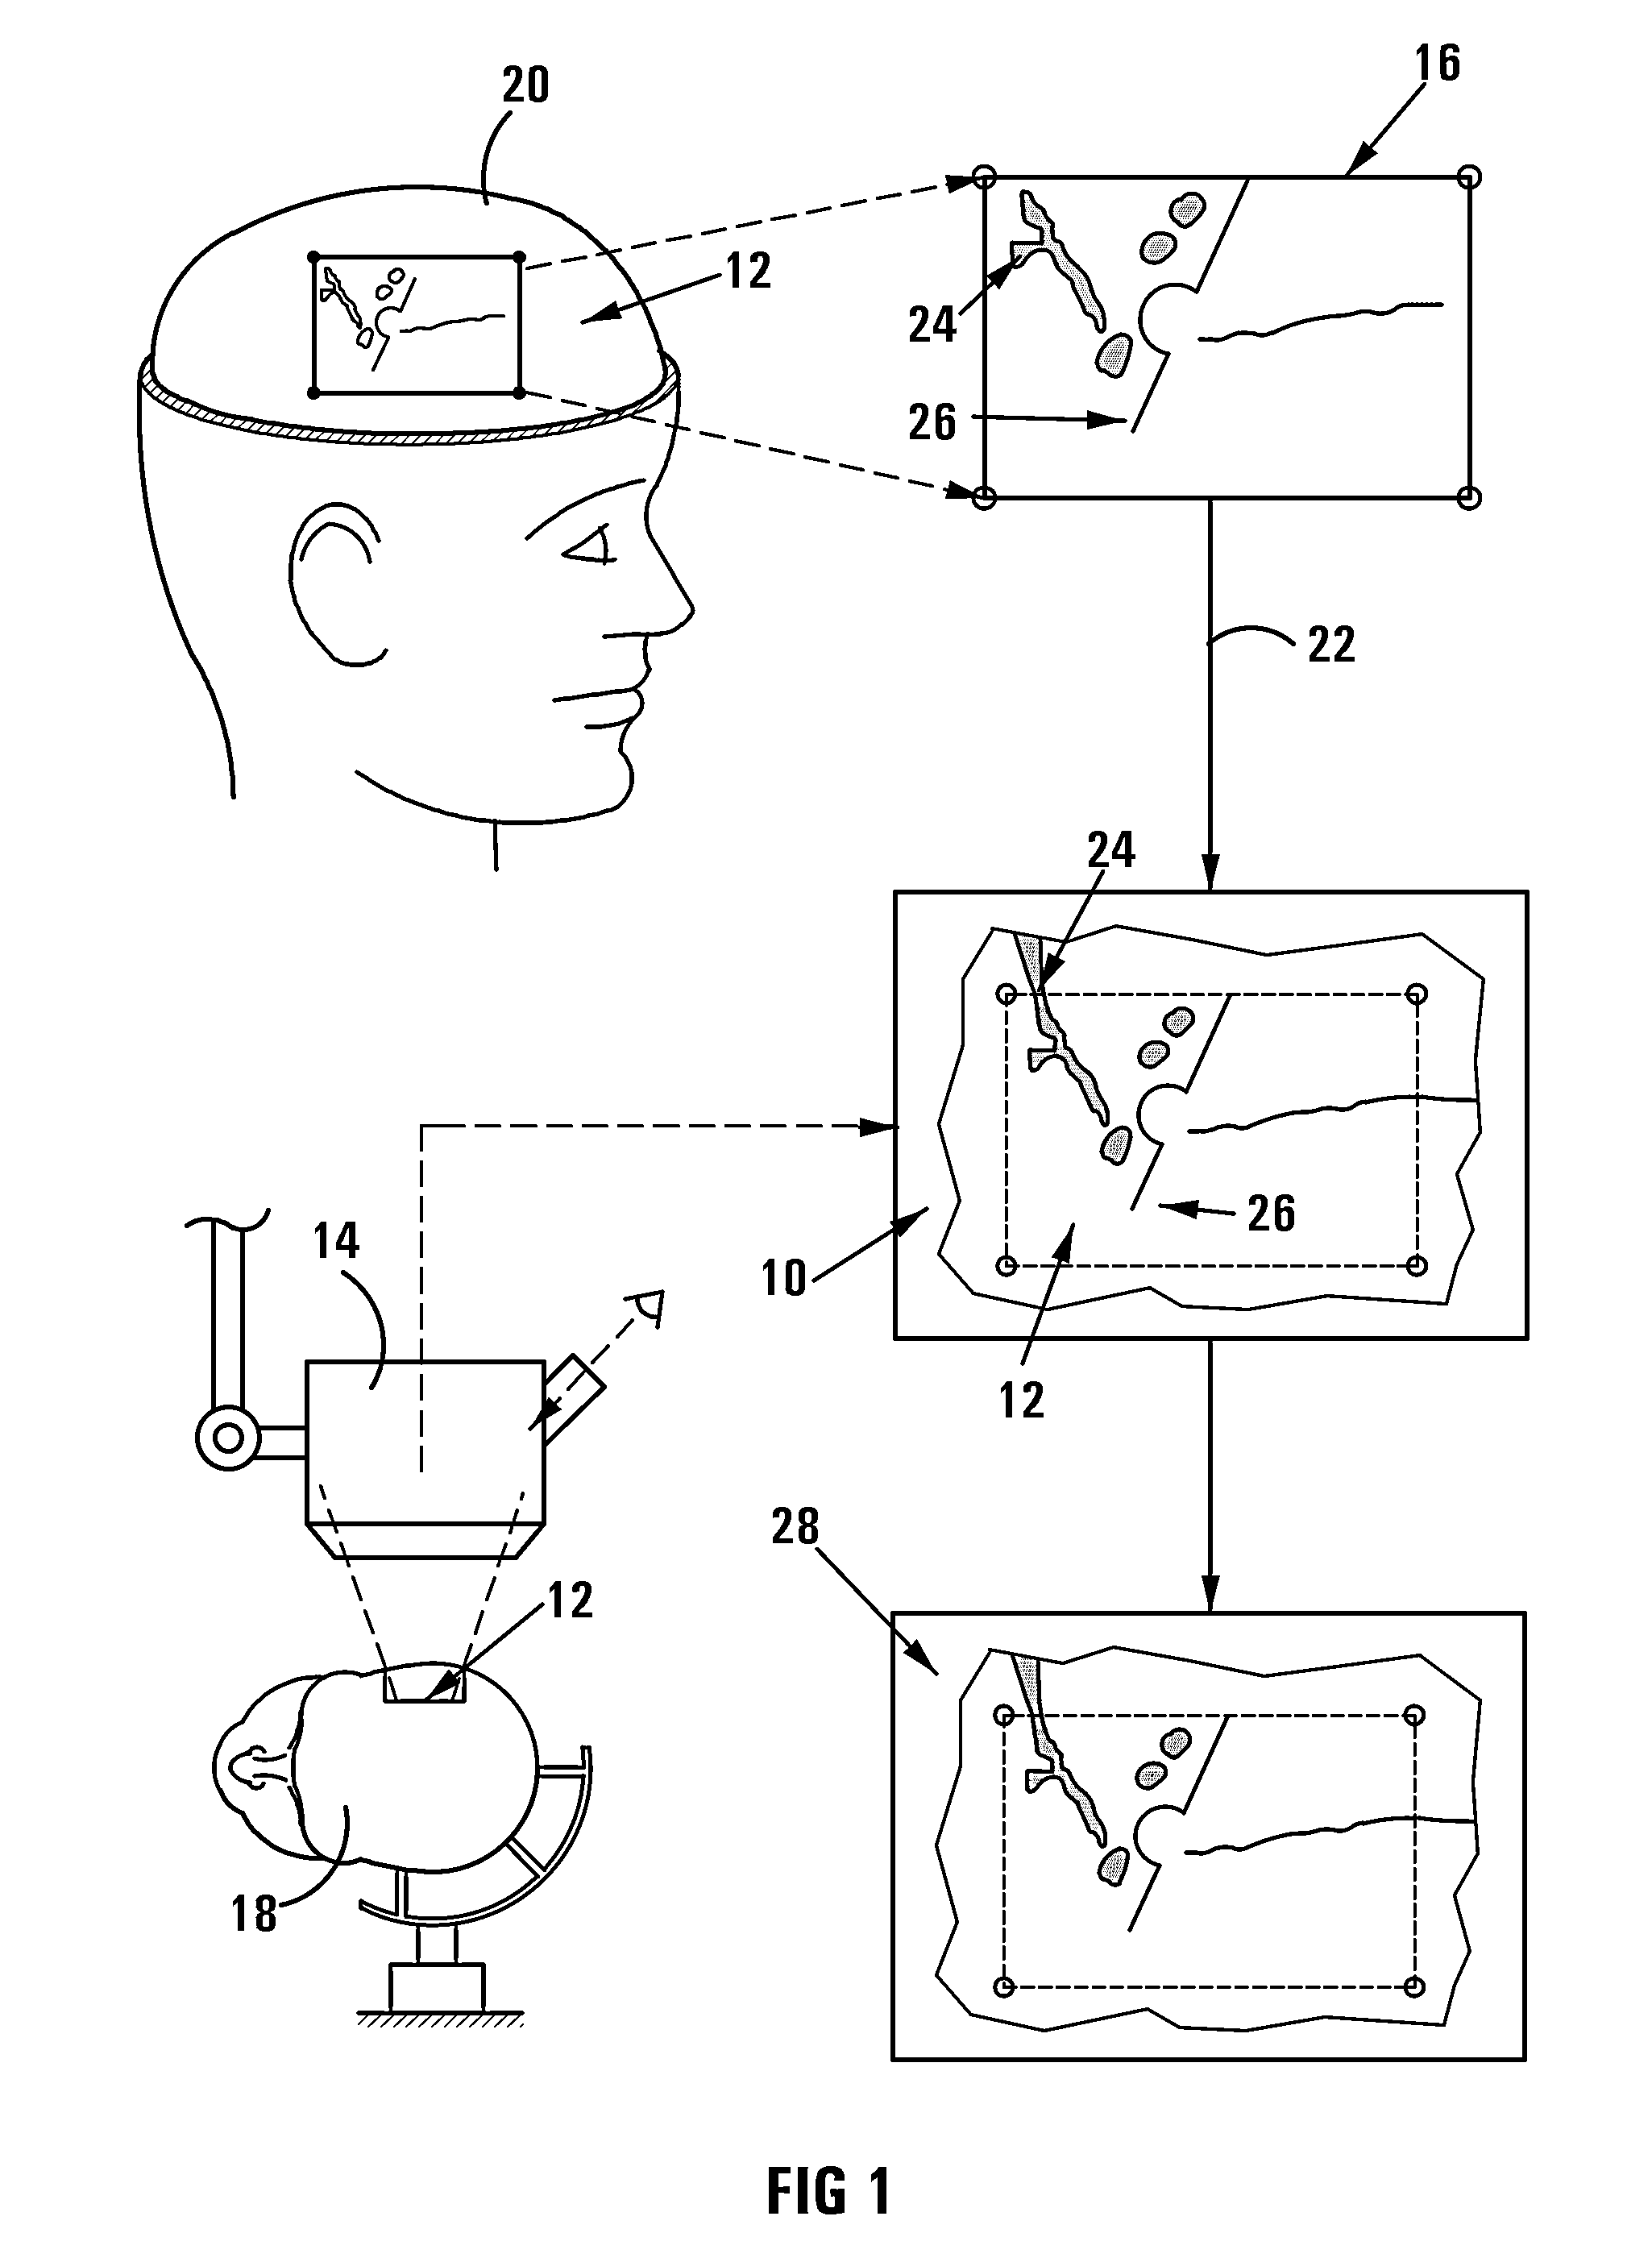 Method of and system for overlaying NBS functional data on a live image of a brain